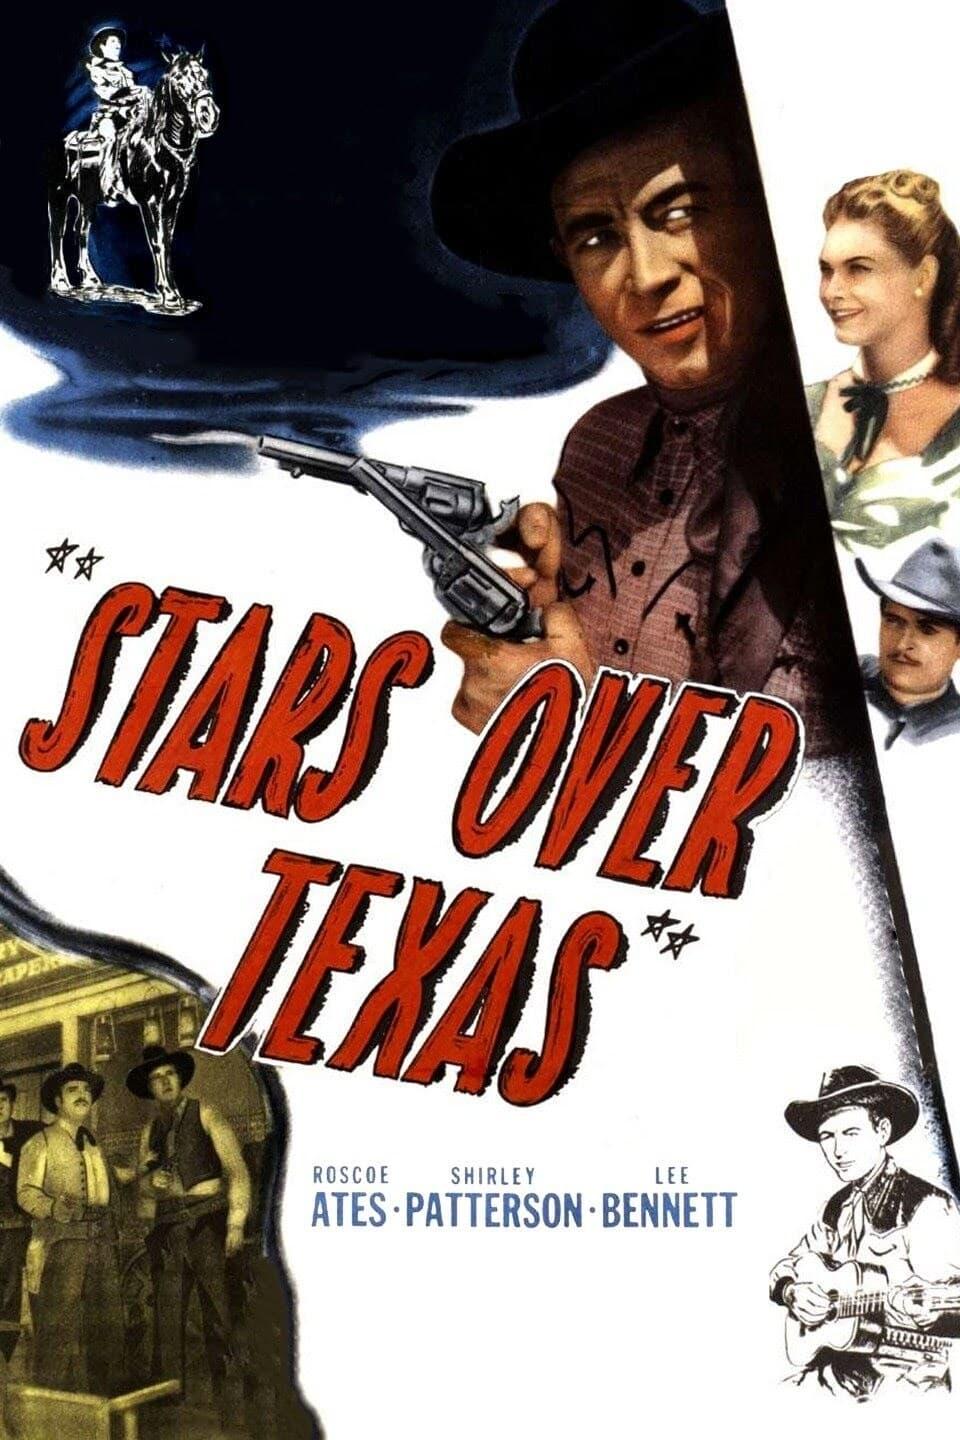 Stars Over Texas poster